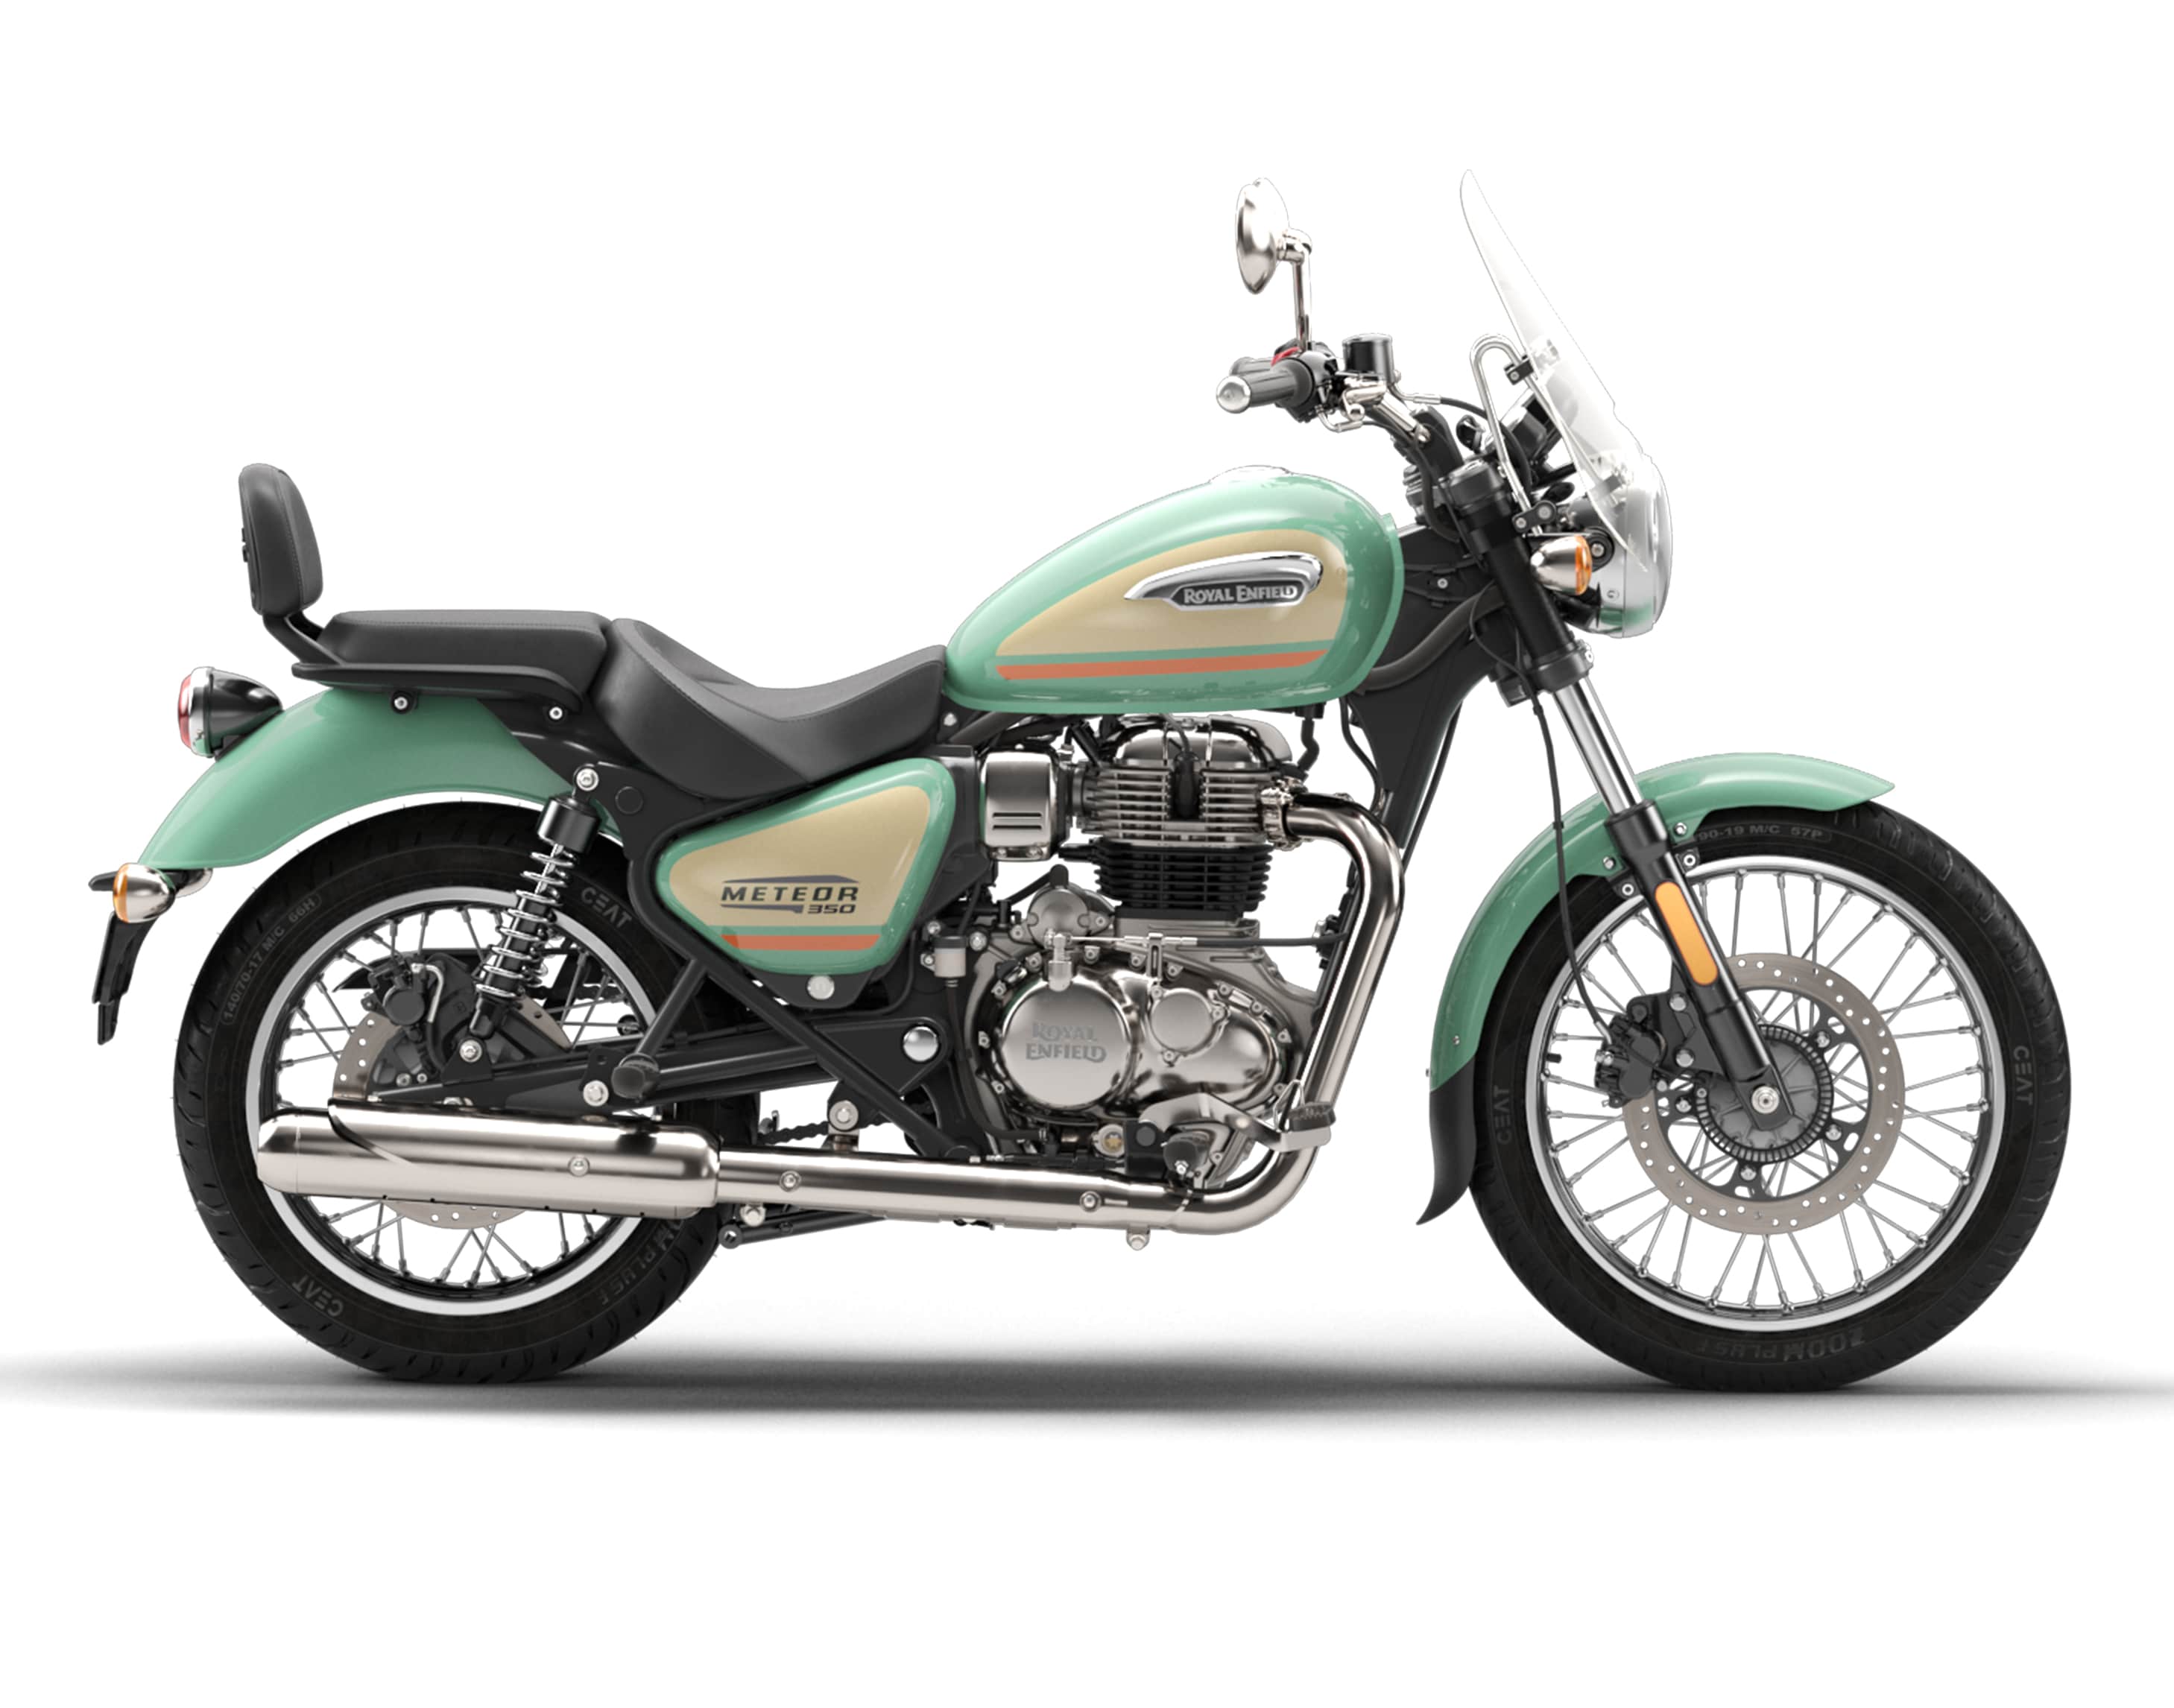 https://www.royalenfield.com/content/dam/royal-enfield/united-kingdom/motorcycles/motorcycle-page-thumbnails/meteor.png